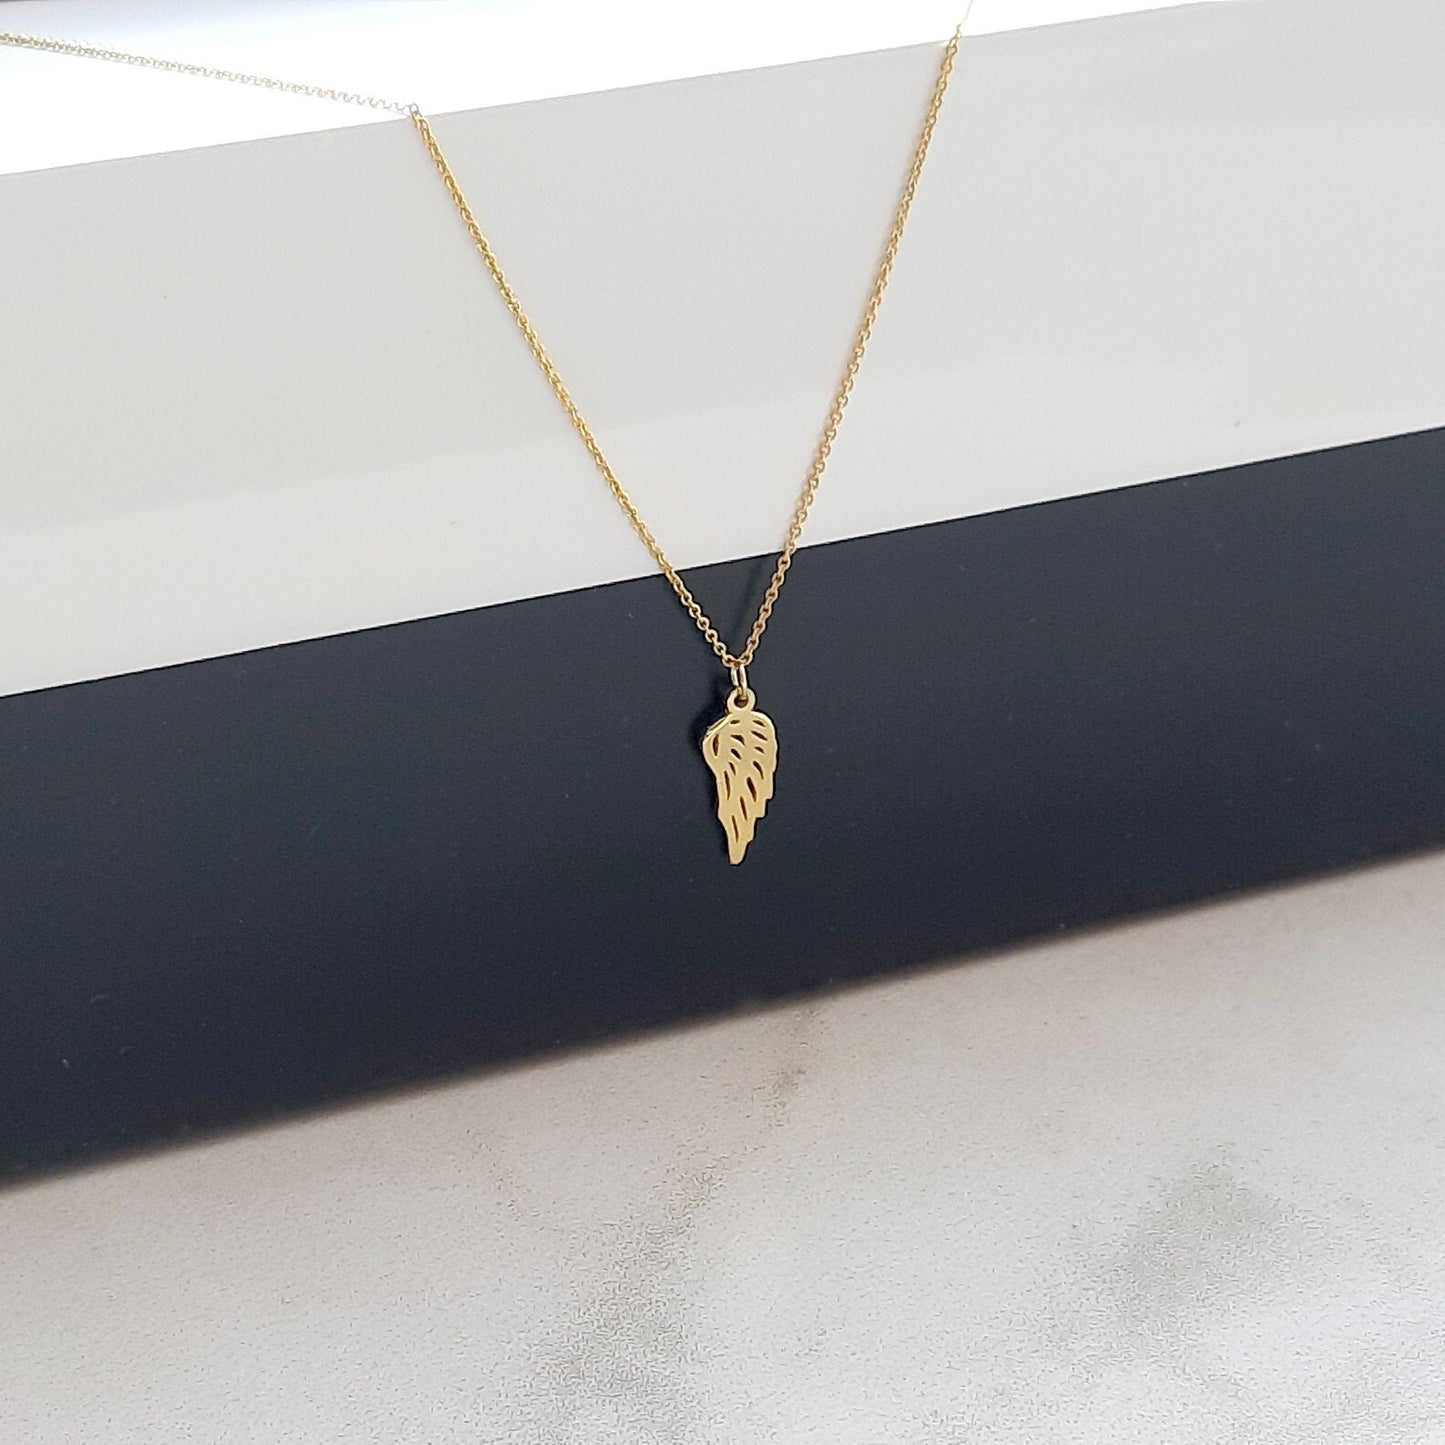 14K Yellow Gold half wing necklace, 14k solid gold necklace, Dainty wing necklace, Solid gold chain , angel wing charm necklace gift for her